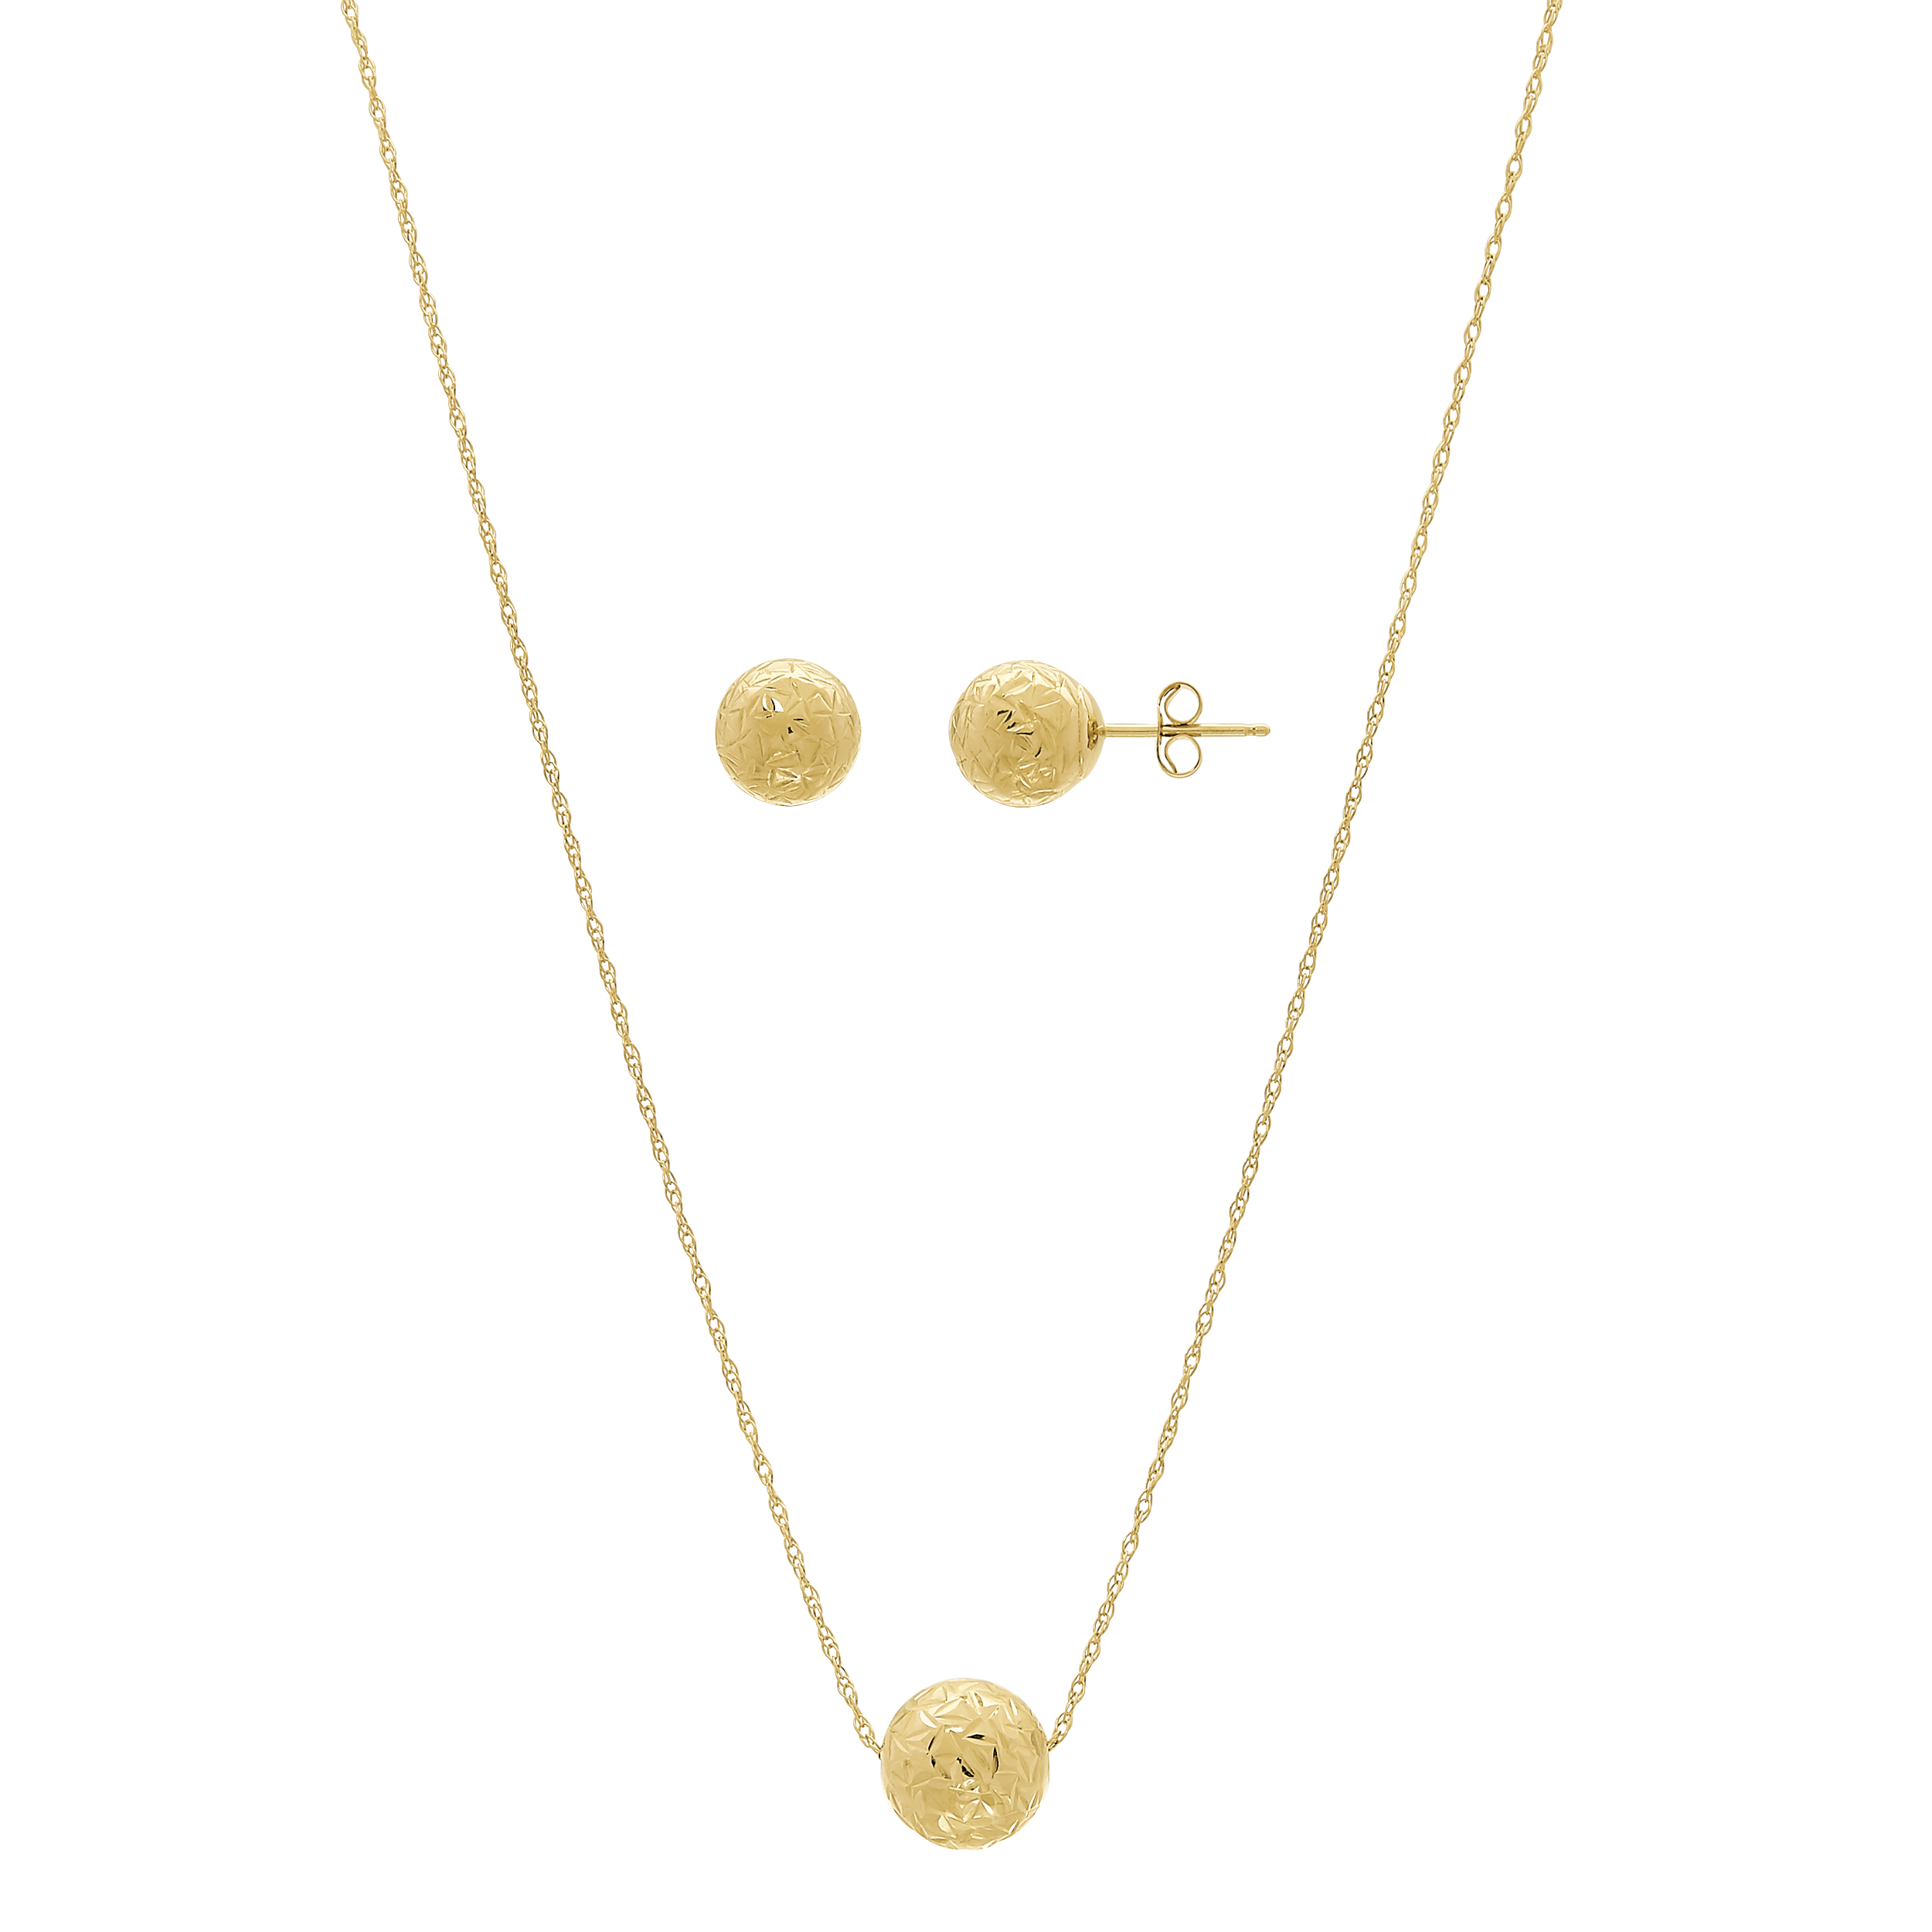 10KT Gold 7MM Crystal Cut Ball Stud and 8MM Ball Pendant and Earring Set